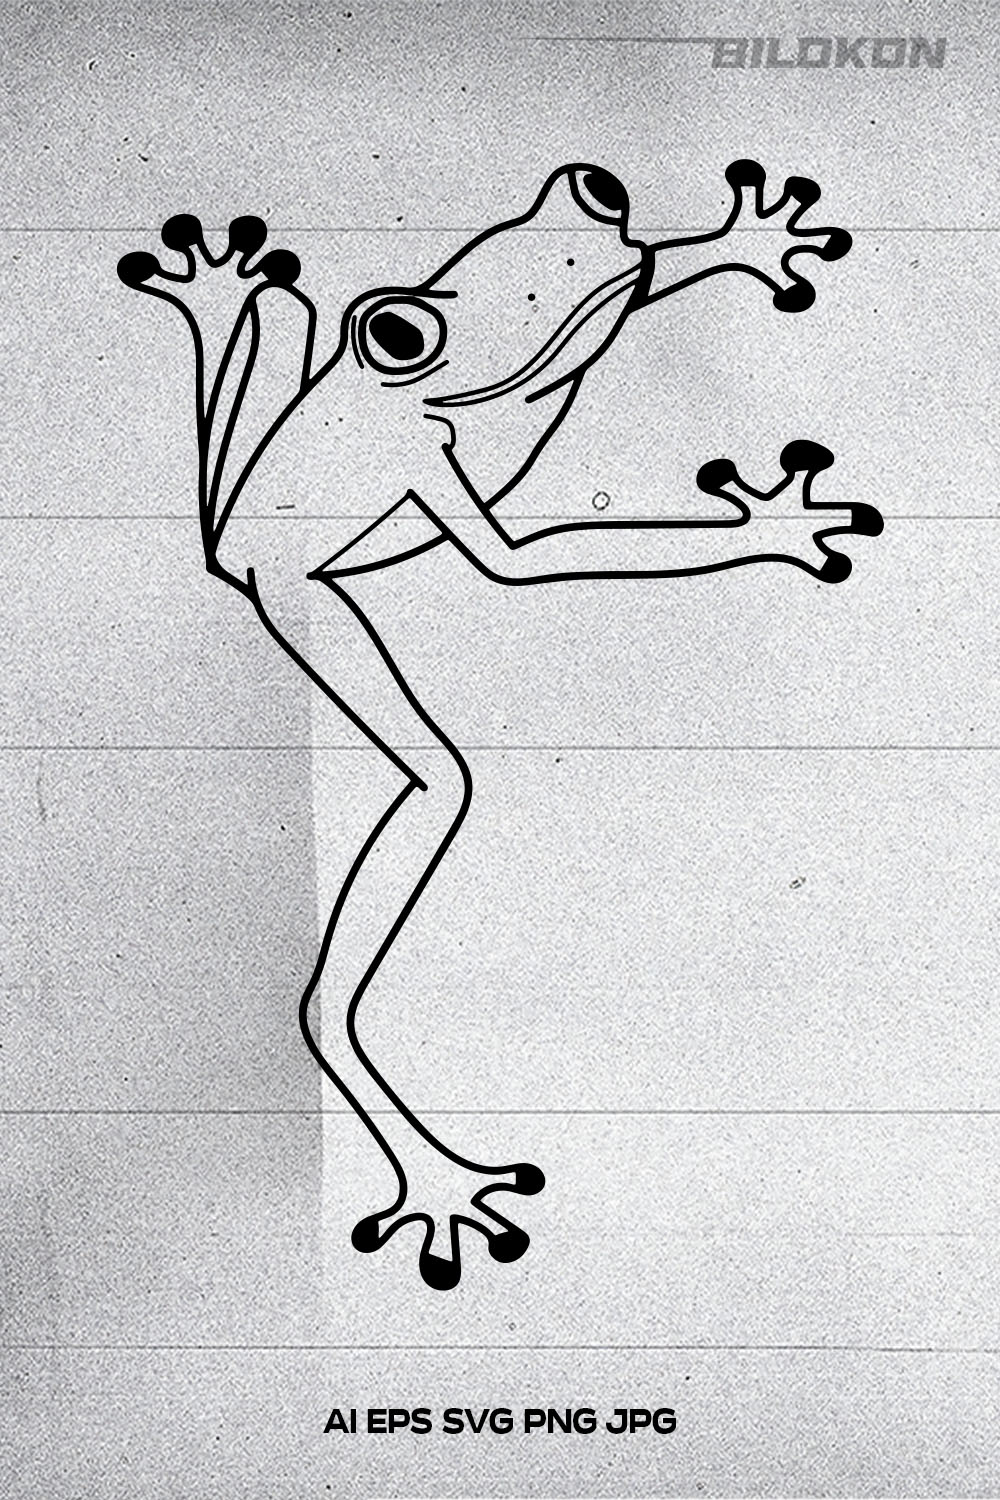 Black and white drawing of a frog on a wall.